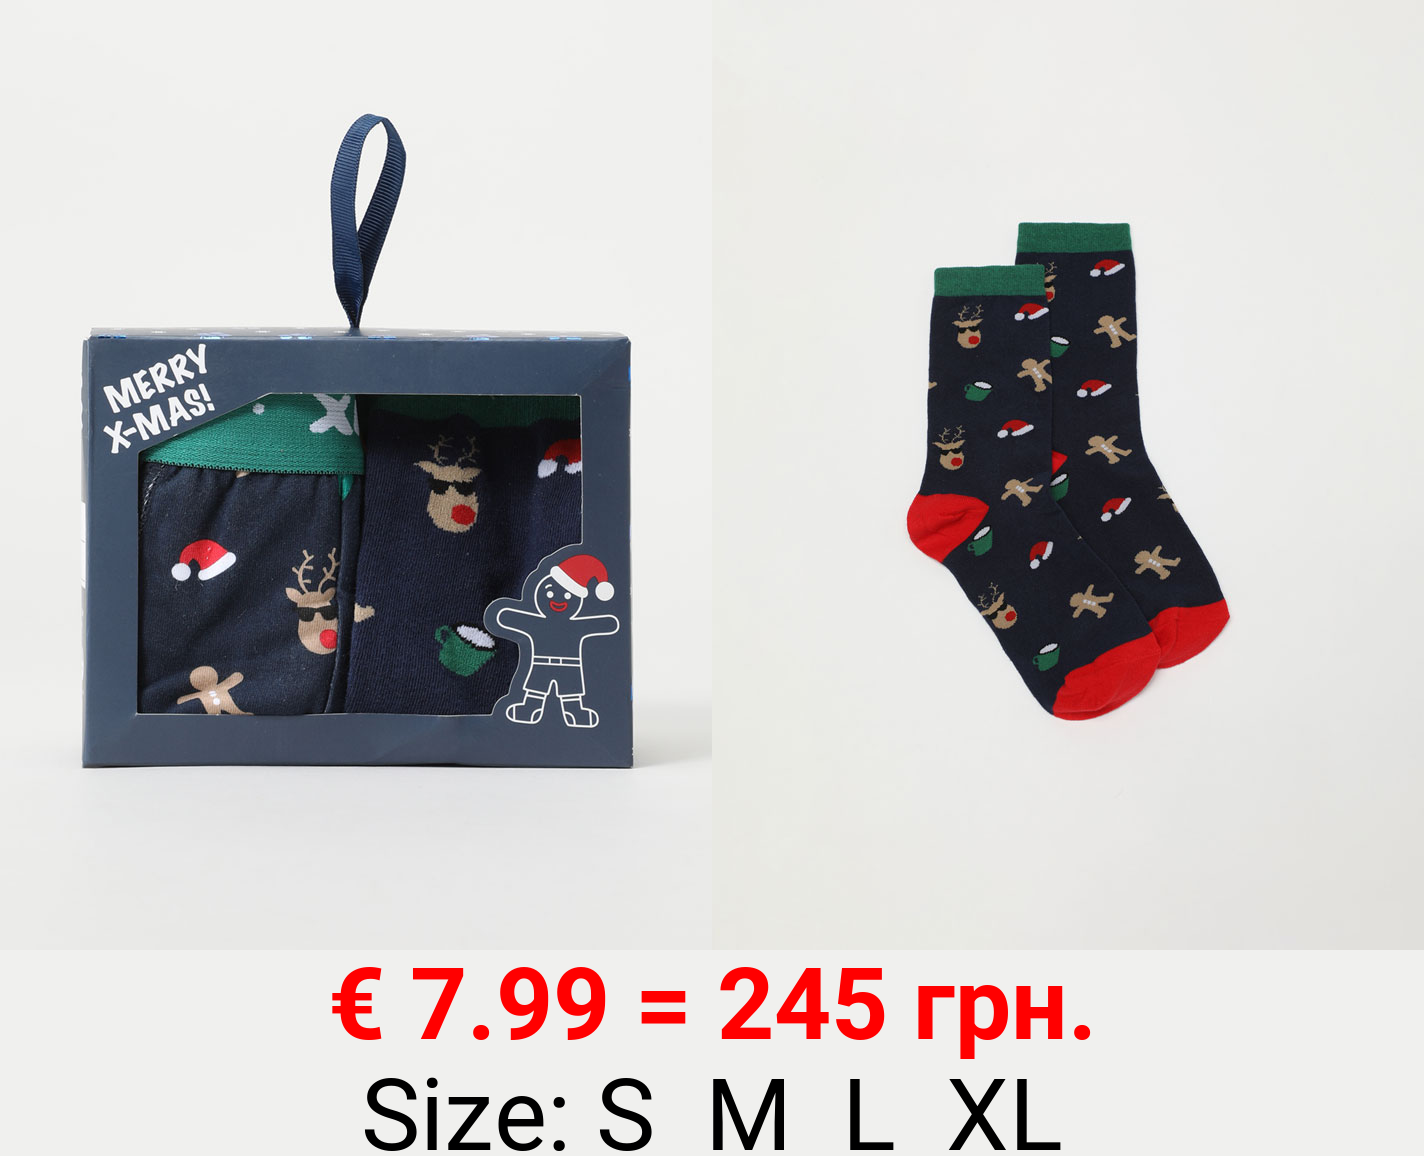 Pack of 2 boxers with a Christmas print